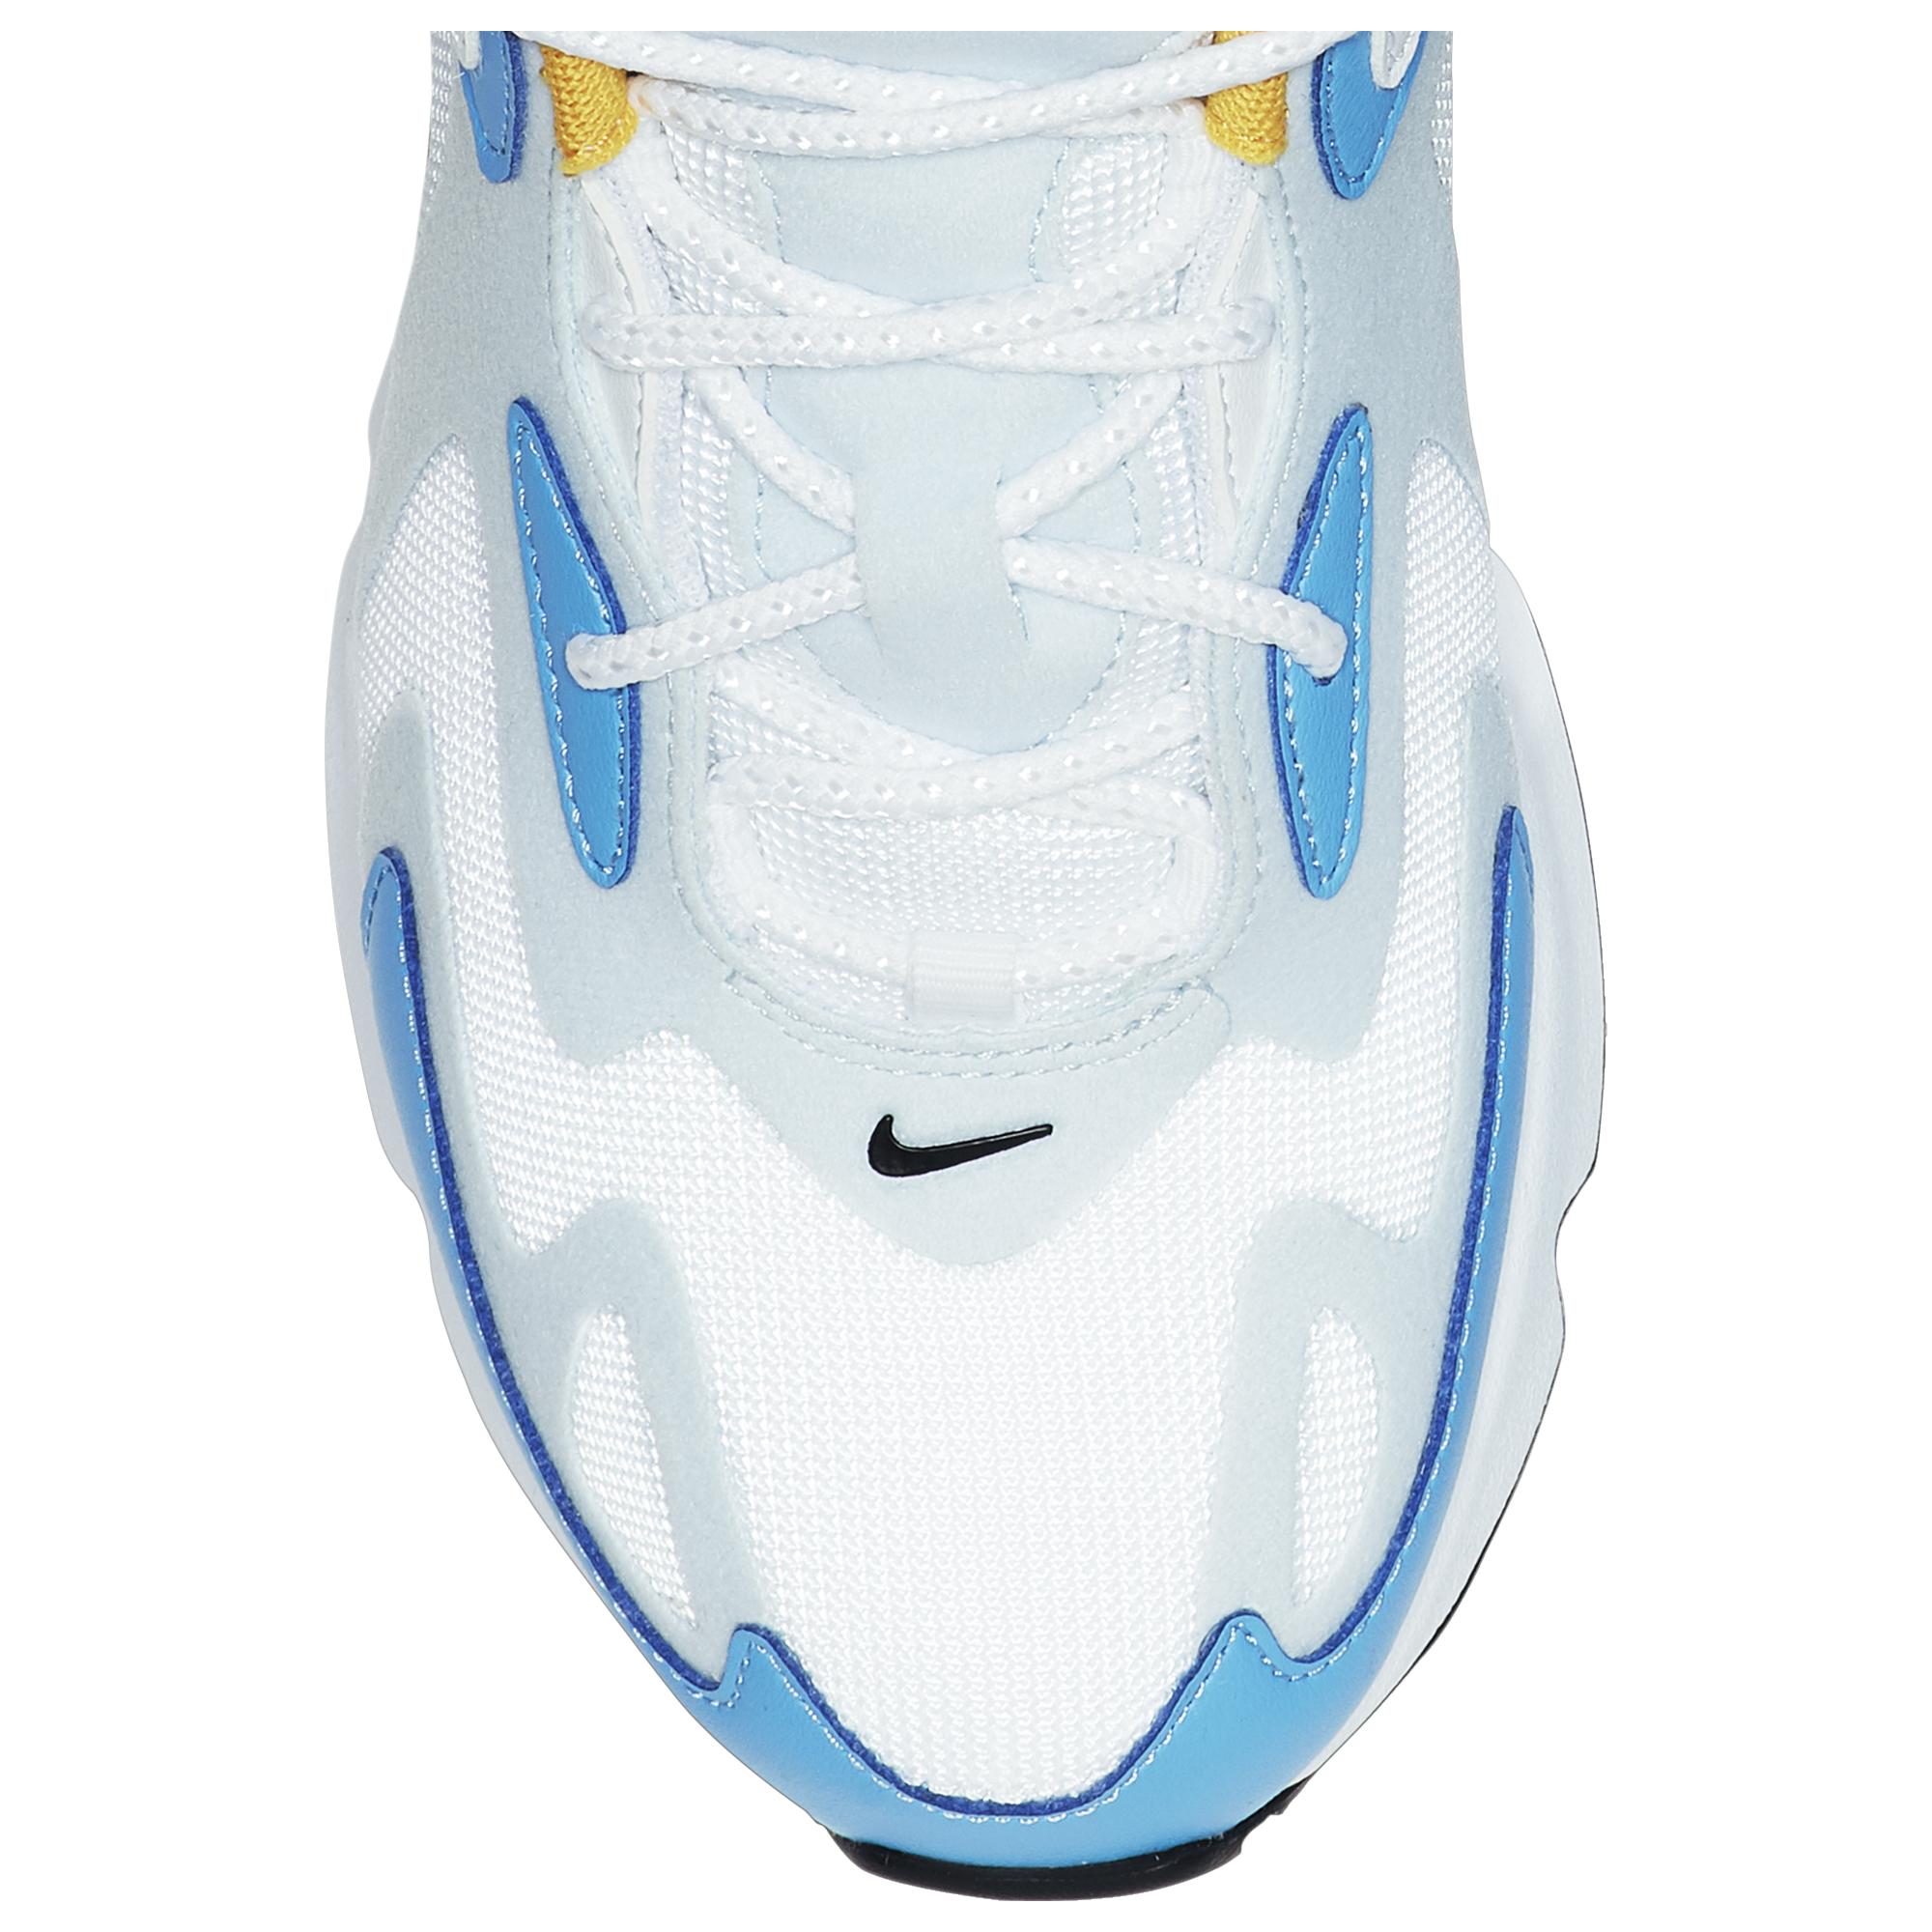 Nike Rubber Air Max 200 Shoe in White/Blue/Yellow (White) - Lyst